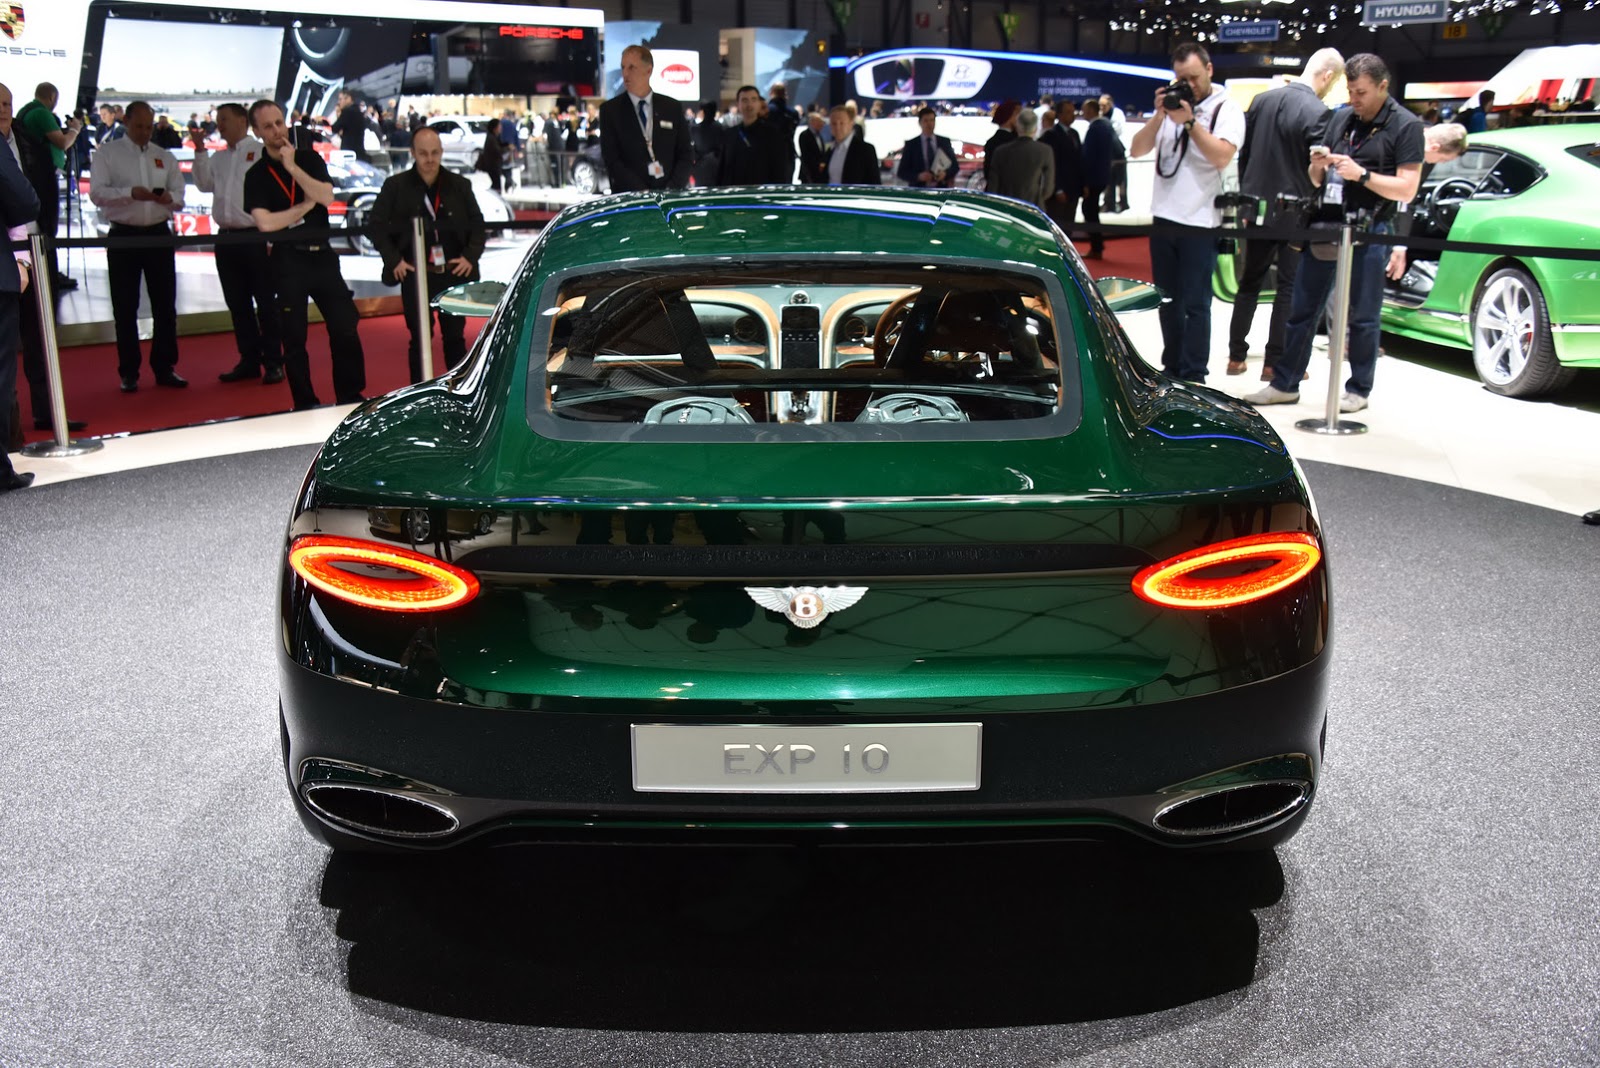 Bentley Exp 10 Speed Six Analyzed Up Close In Geneva 54 Pics Video Carscoops